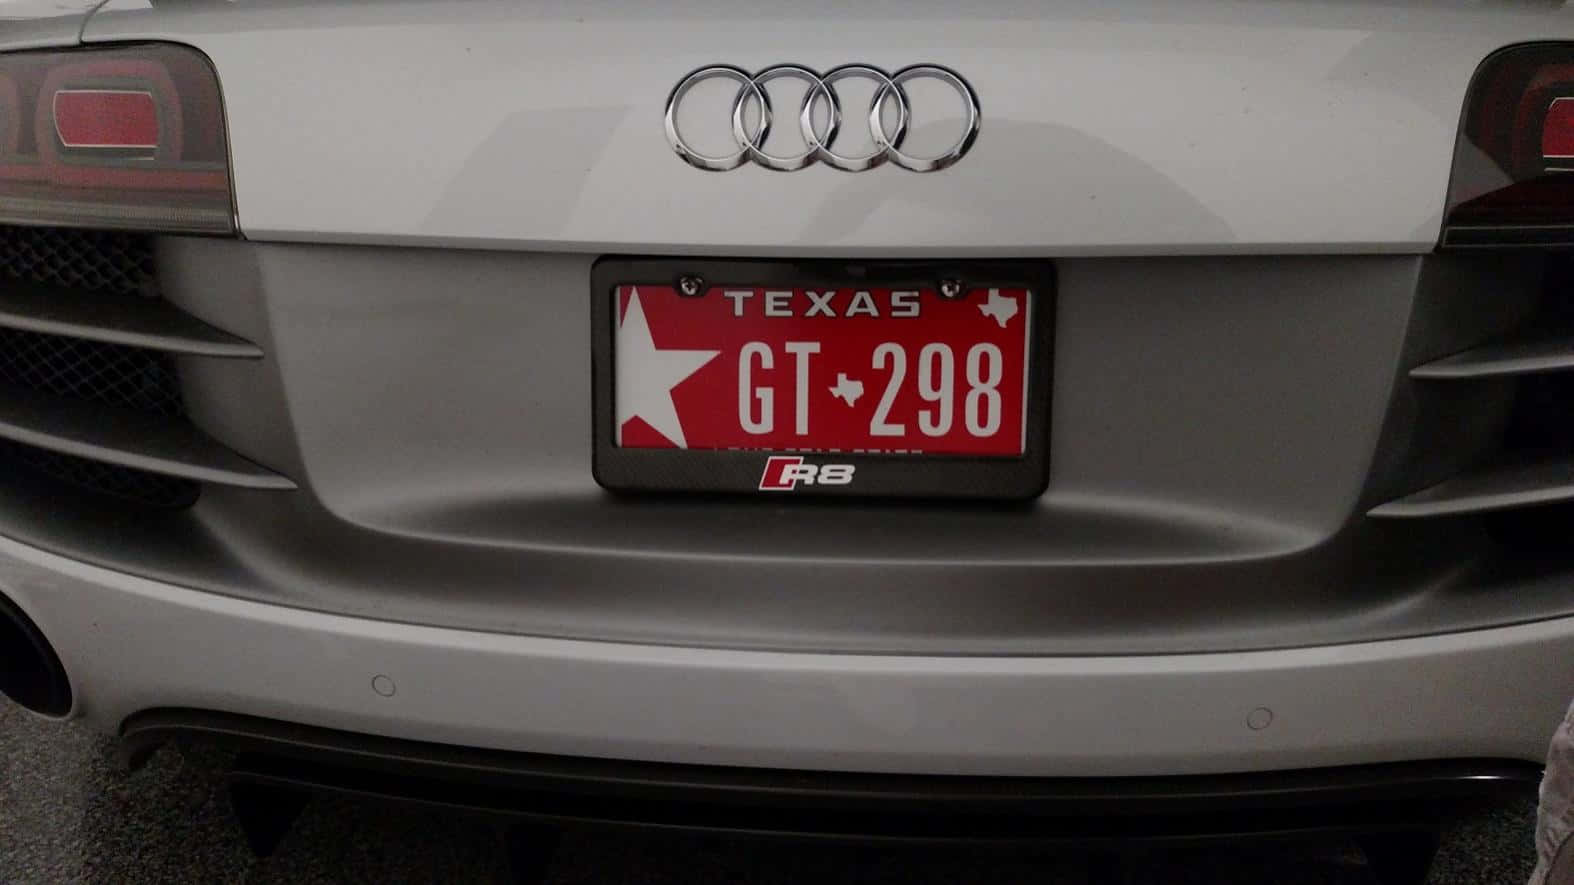 Audi Texas Red License Plate